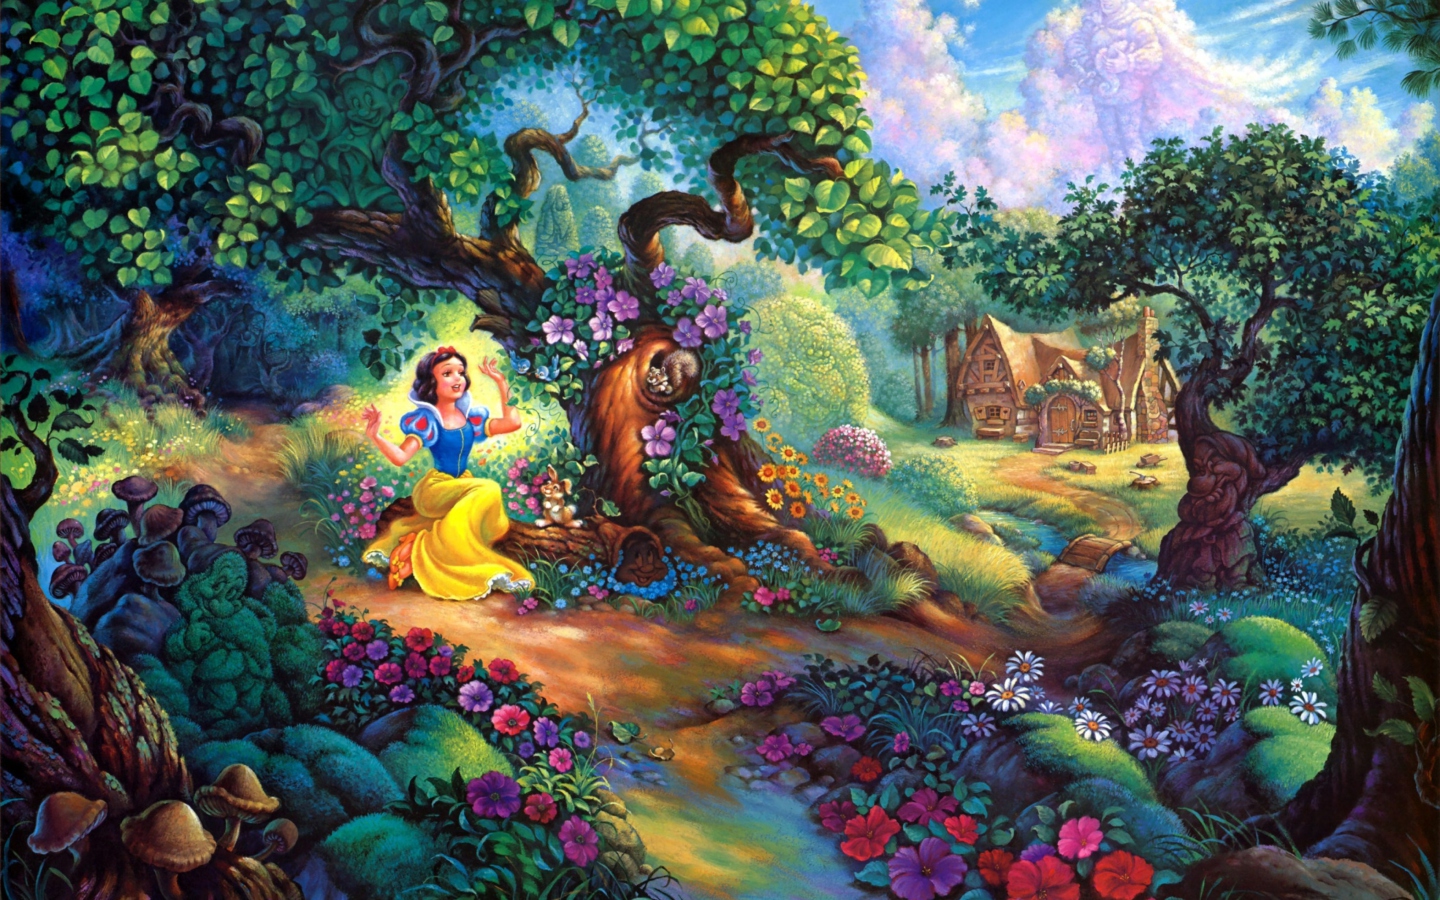 Snow White In Magical Forest wallpaper 1440x900